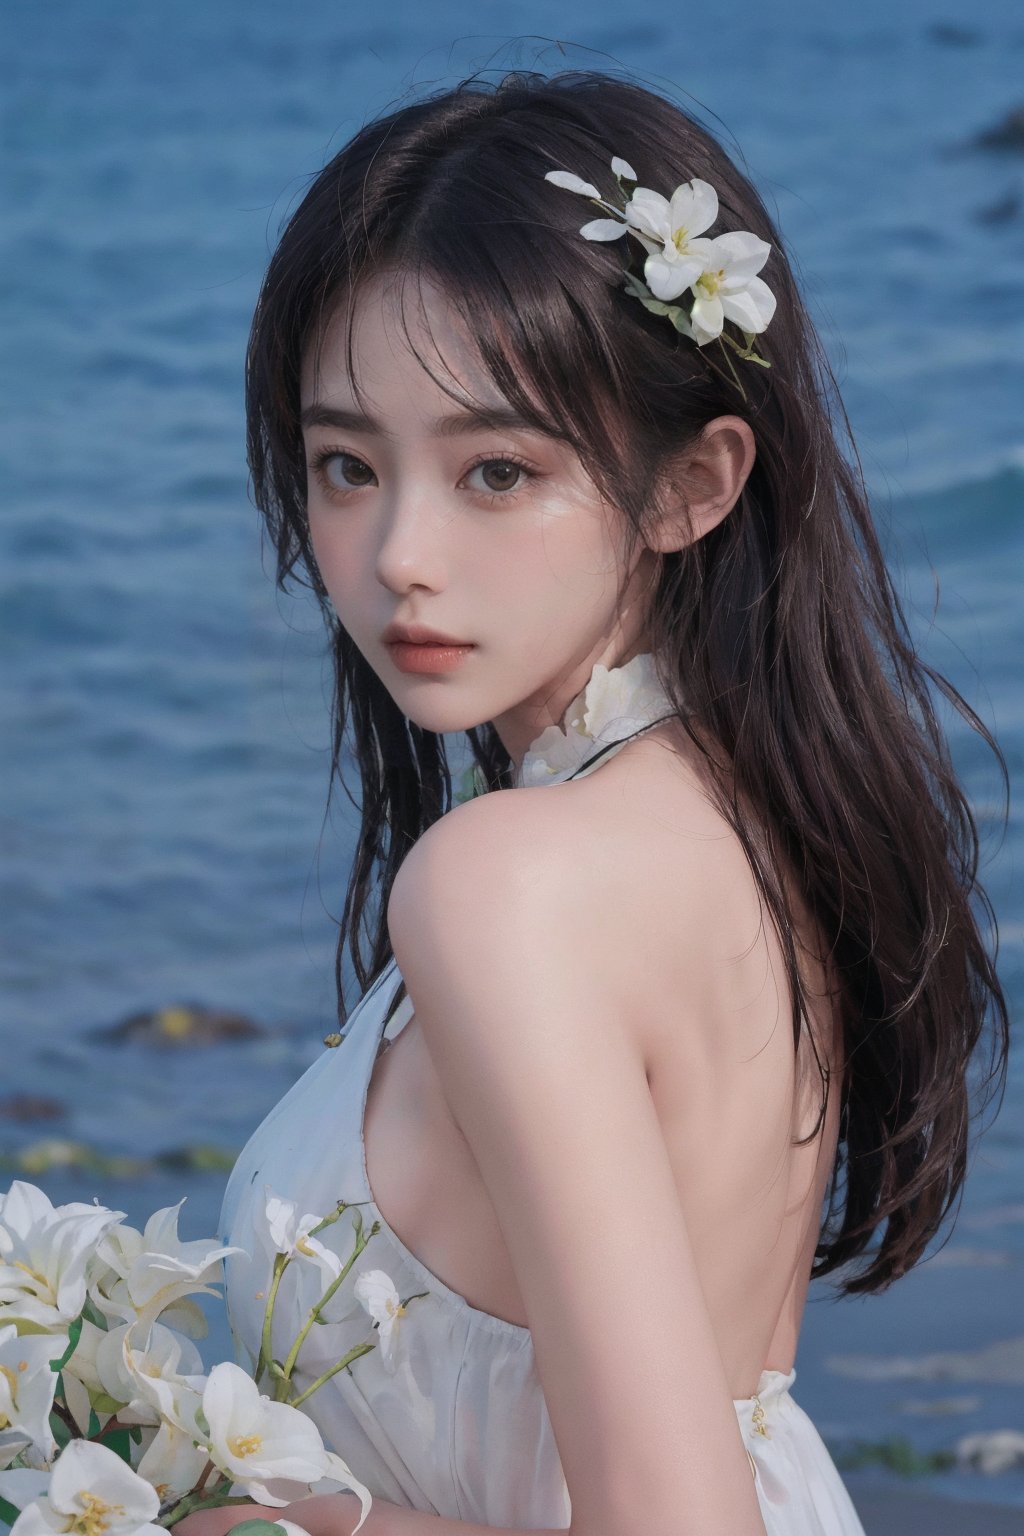 8k, best quality, masterpiece, realistic, high detail, photo realistic, Increase quality, beach, flower, dress, look at viewer, soft expression,